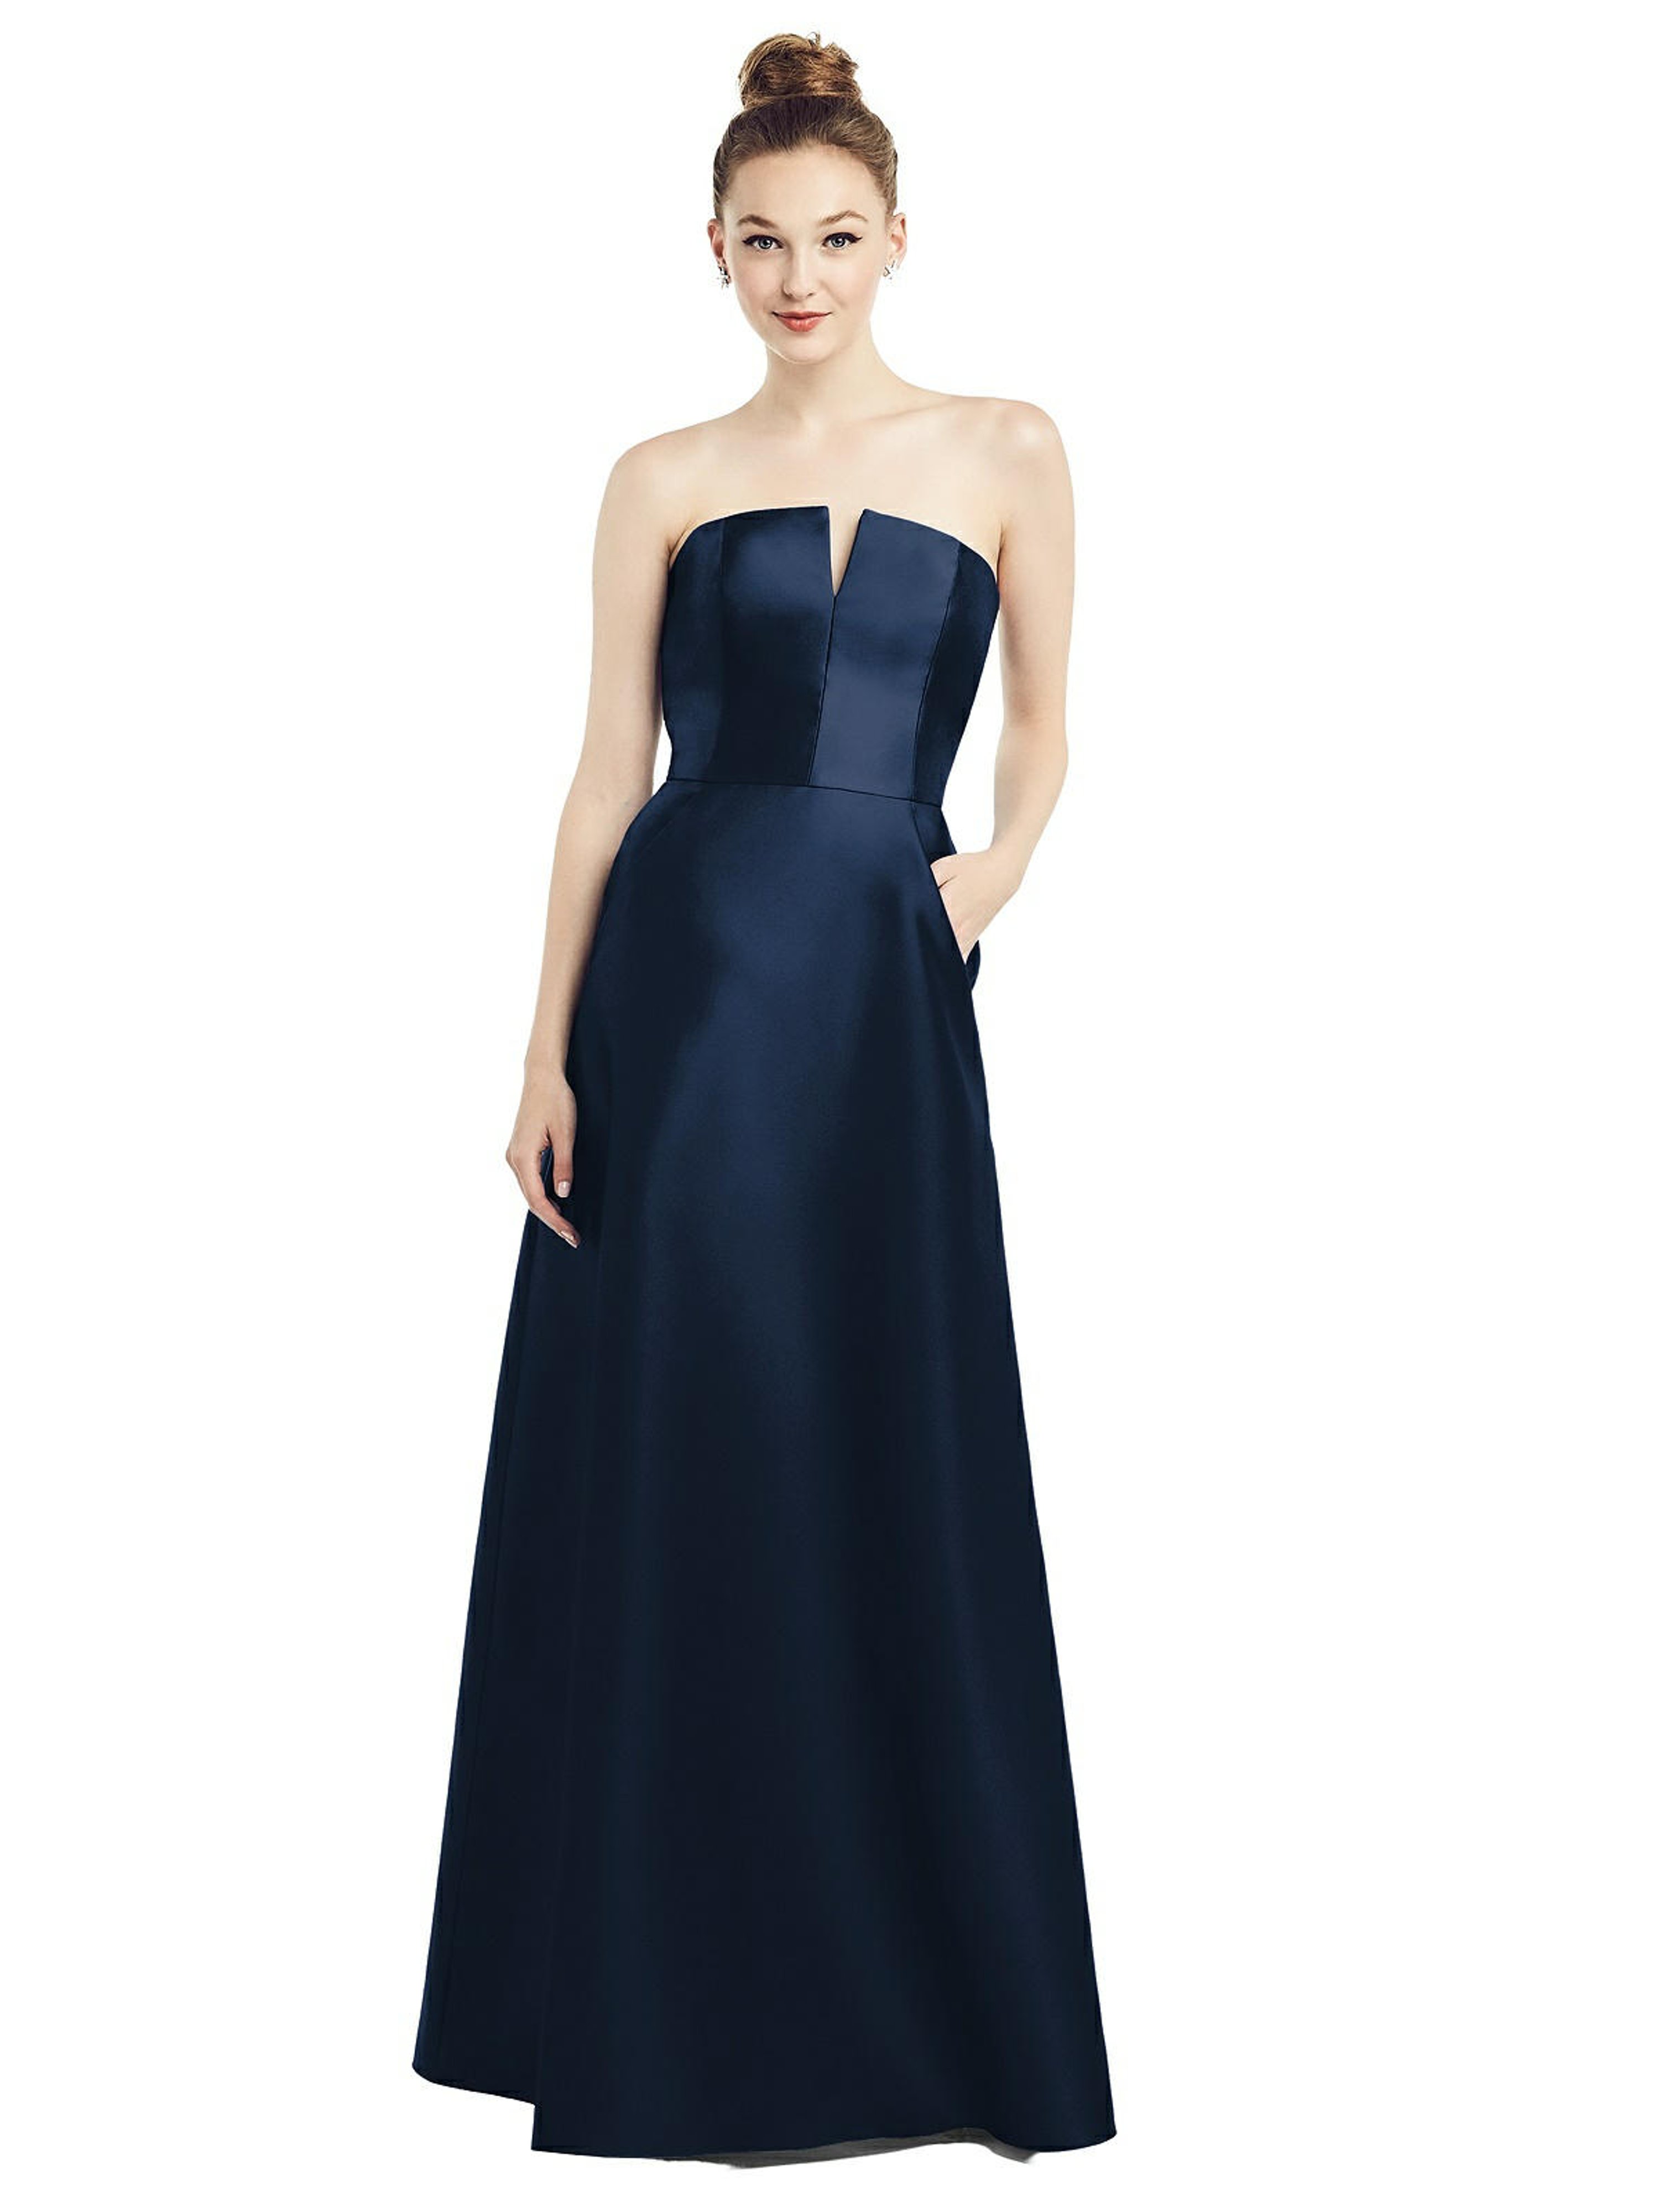 ALFRED SUNG ALFRED SUNG STRAPLESS NOTCH SATIN GOWN WITH POCKETS